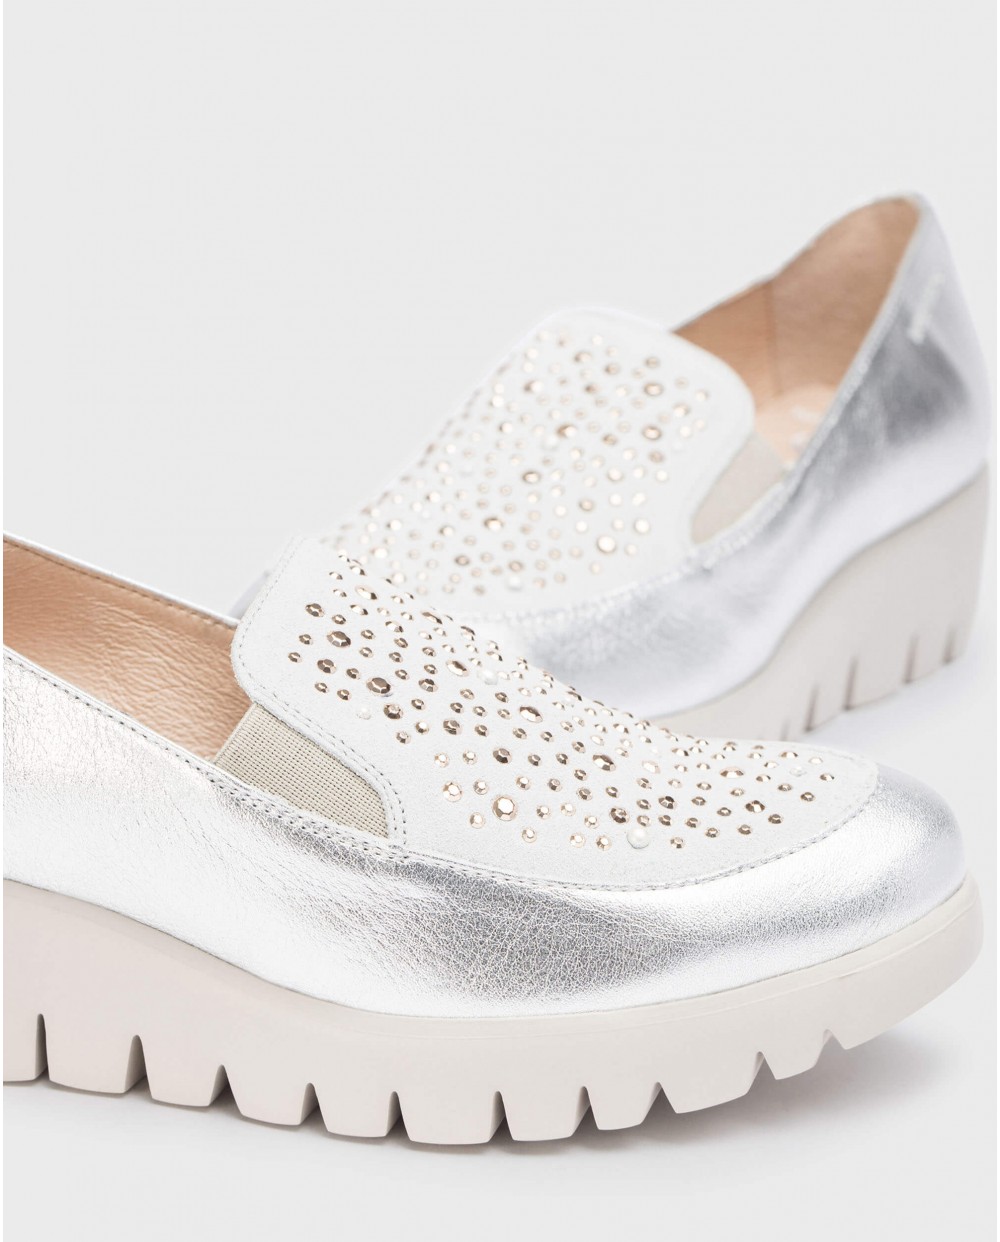 Wonders-Outlet-Metallic DIAMANT loafer